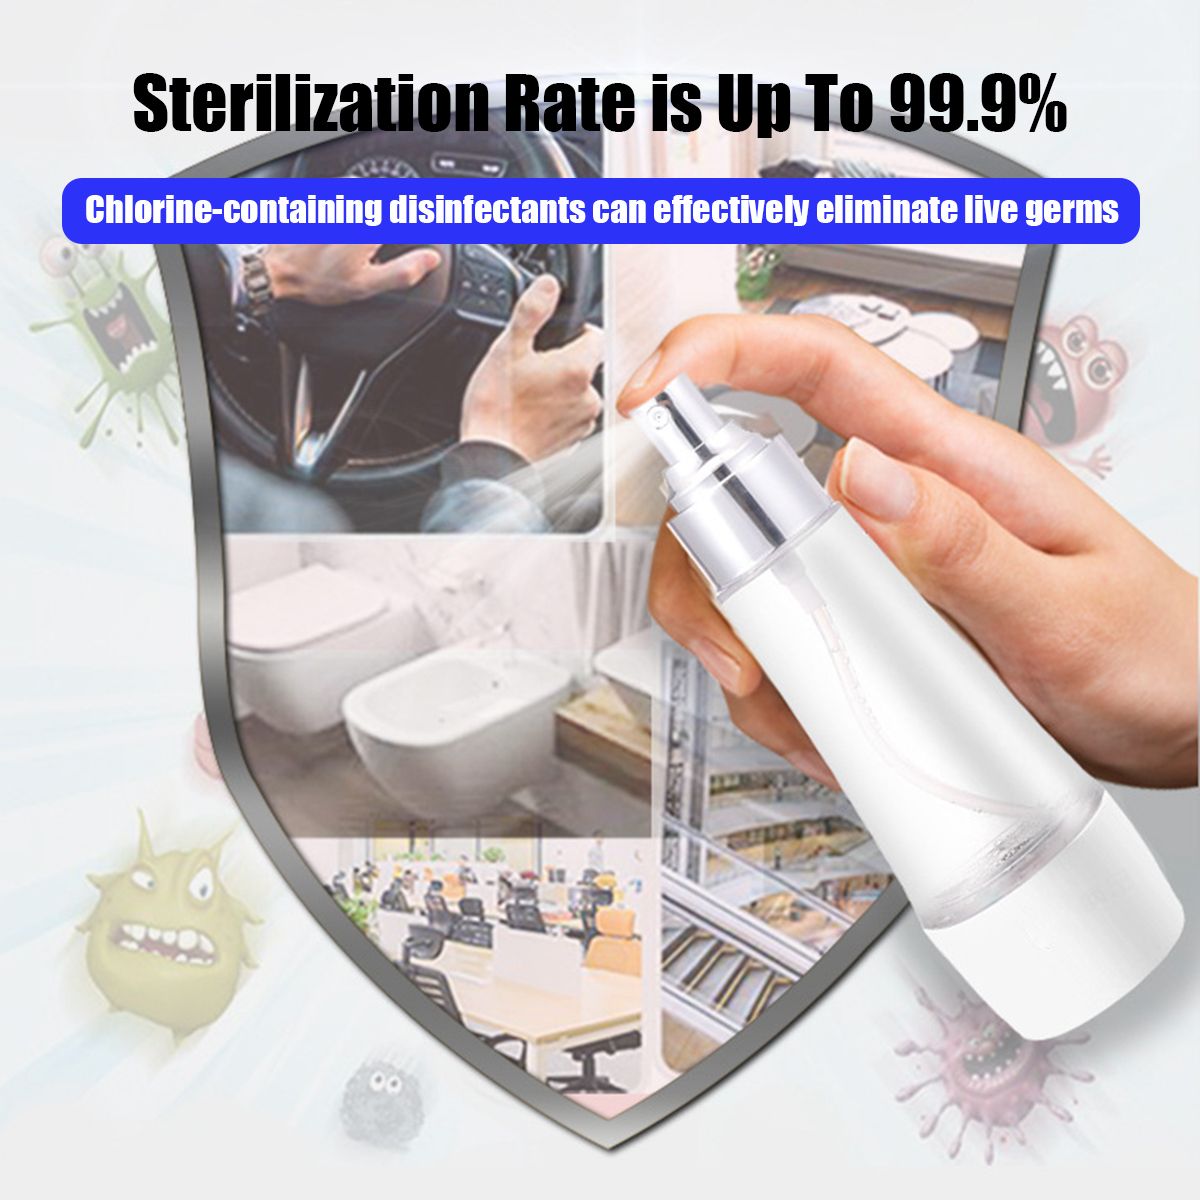 Portable-Sodium-Hypochlorite-Disinfectant-Generator-Disinfection-Water-Maker-1665111